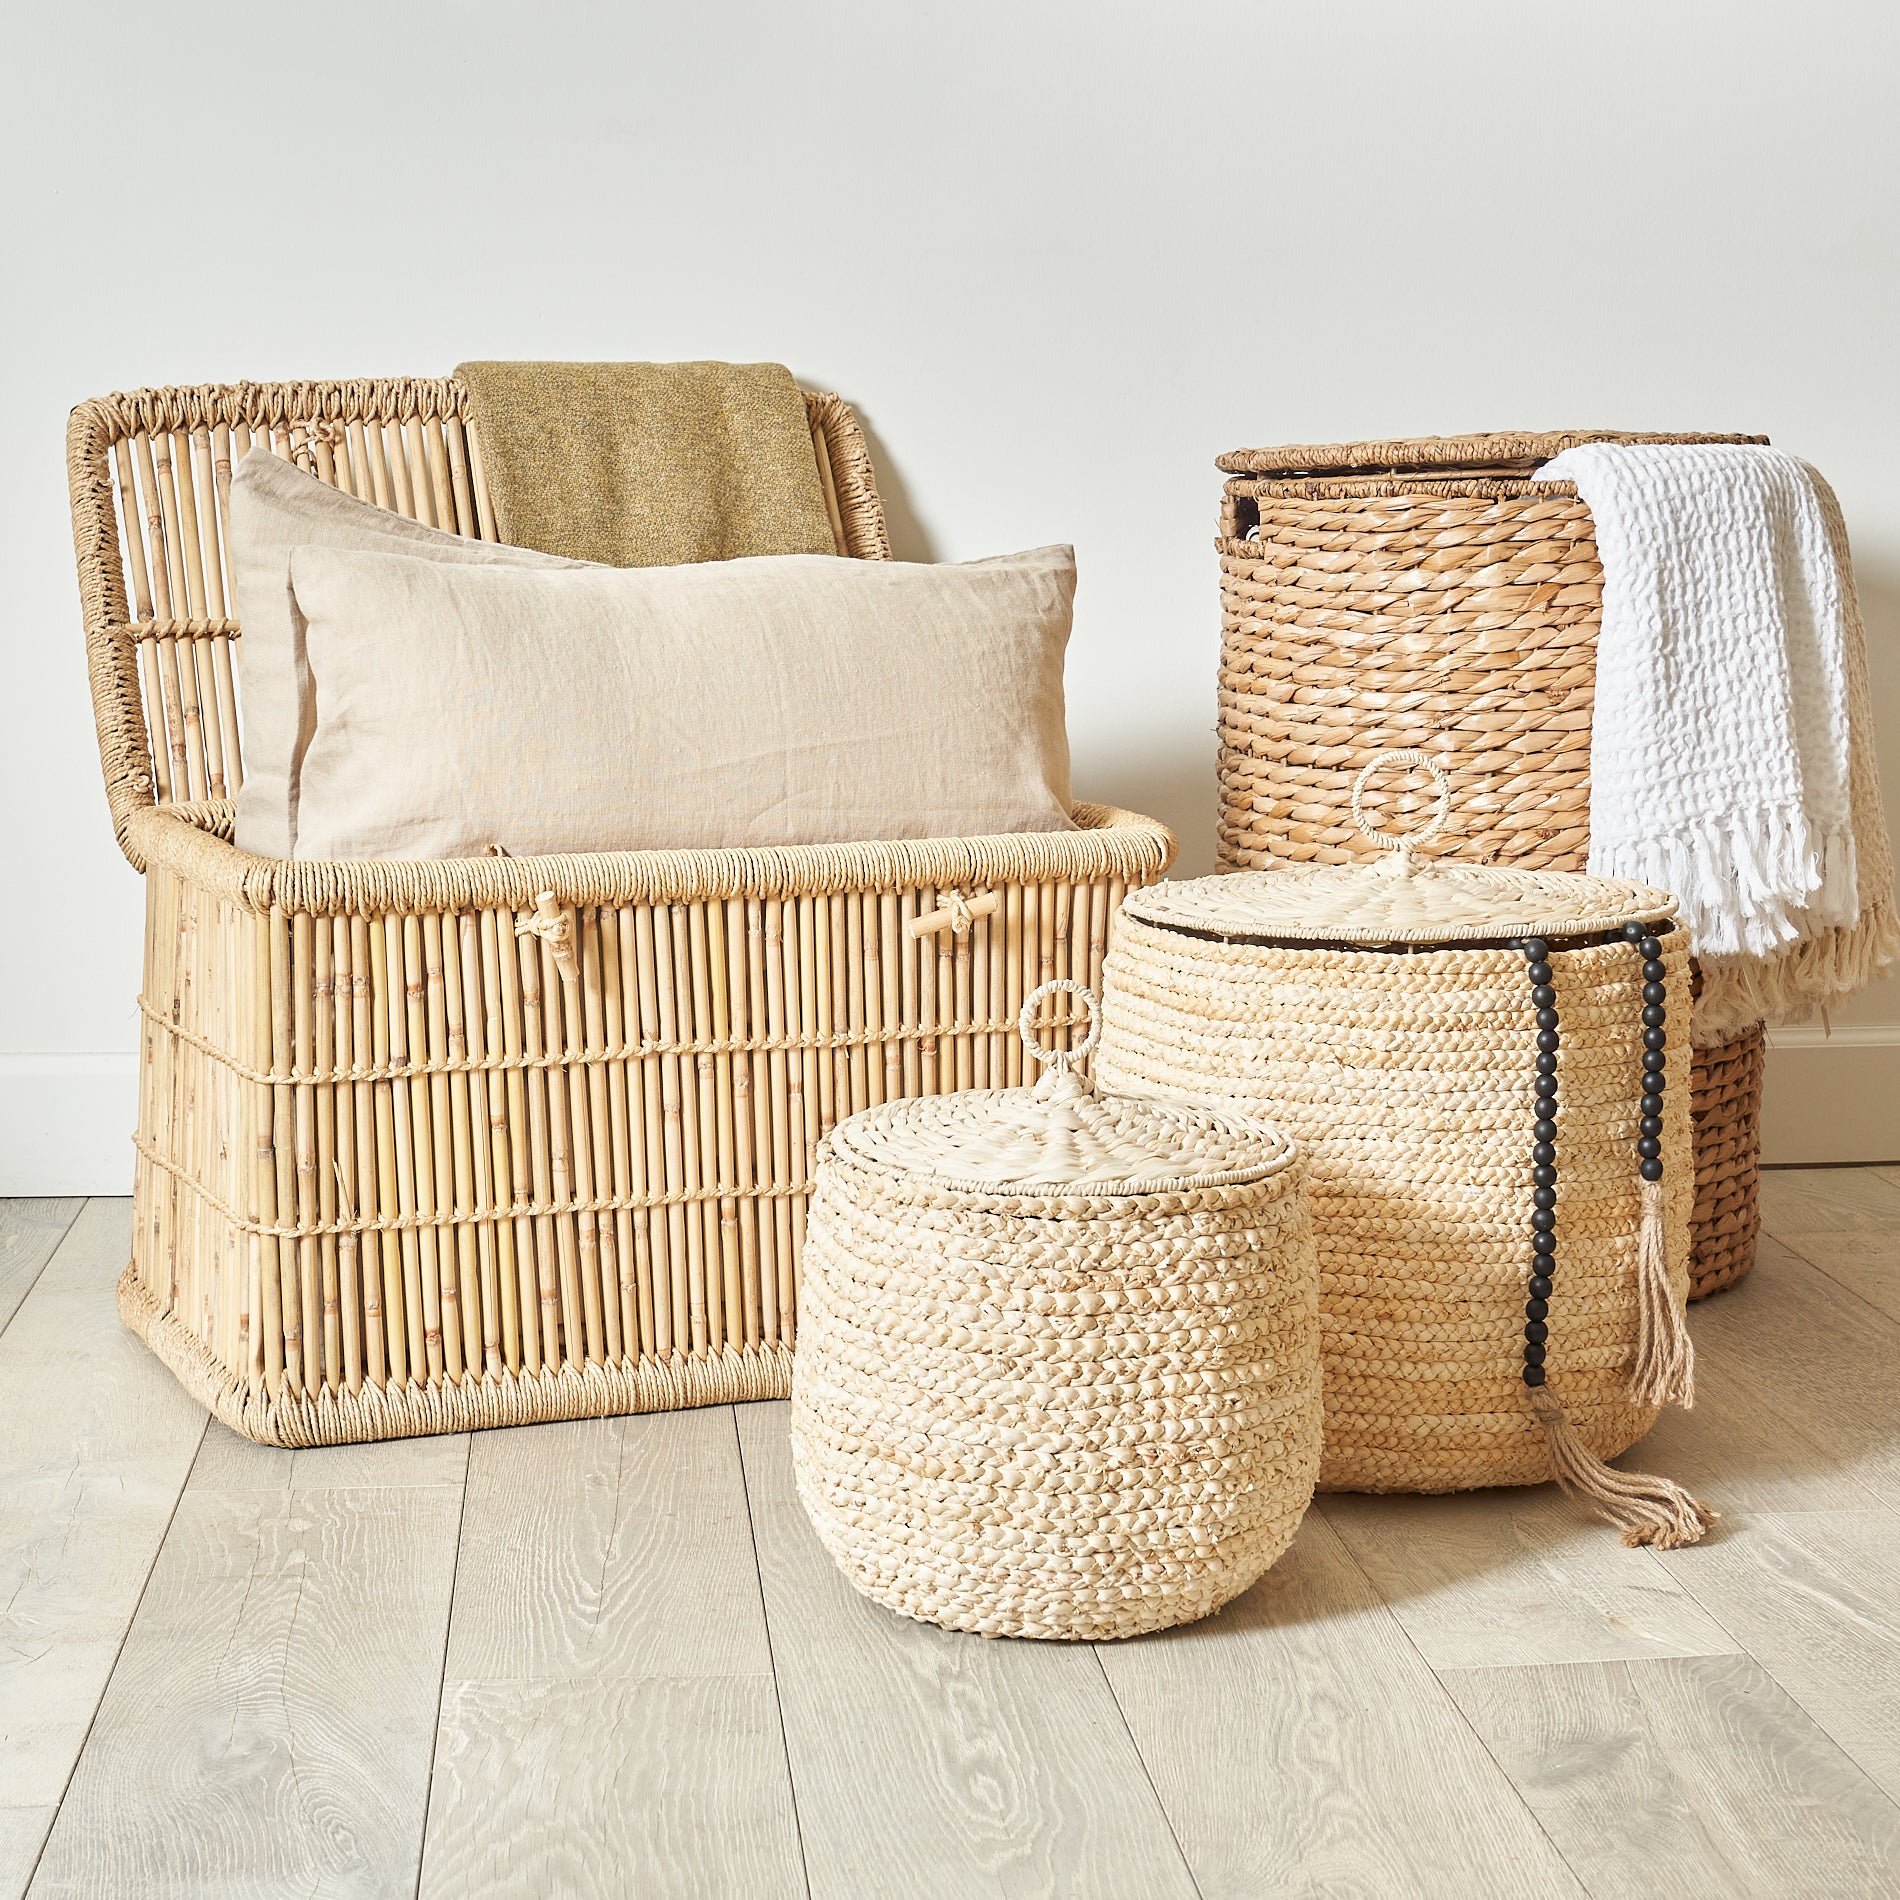 Woven Seagrass Baskets with Lids